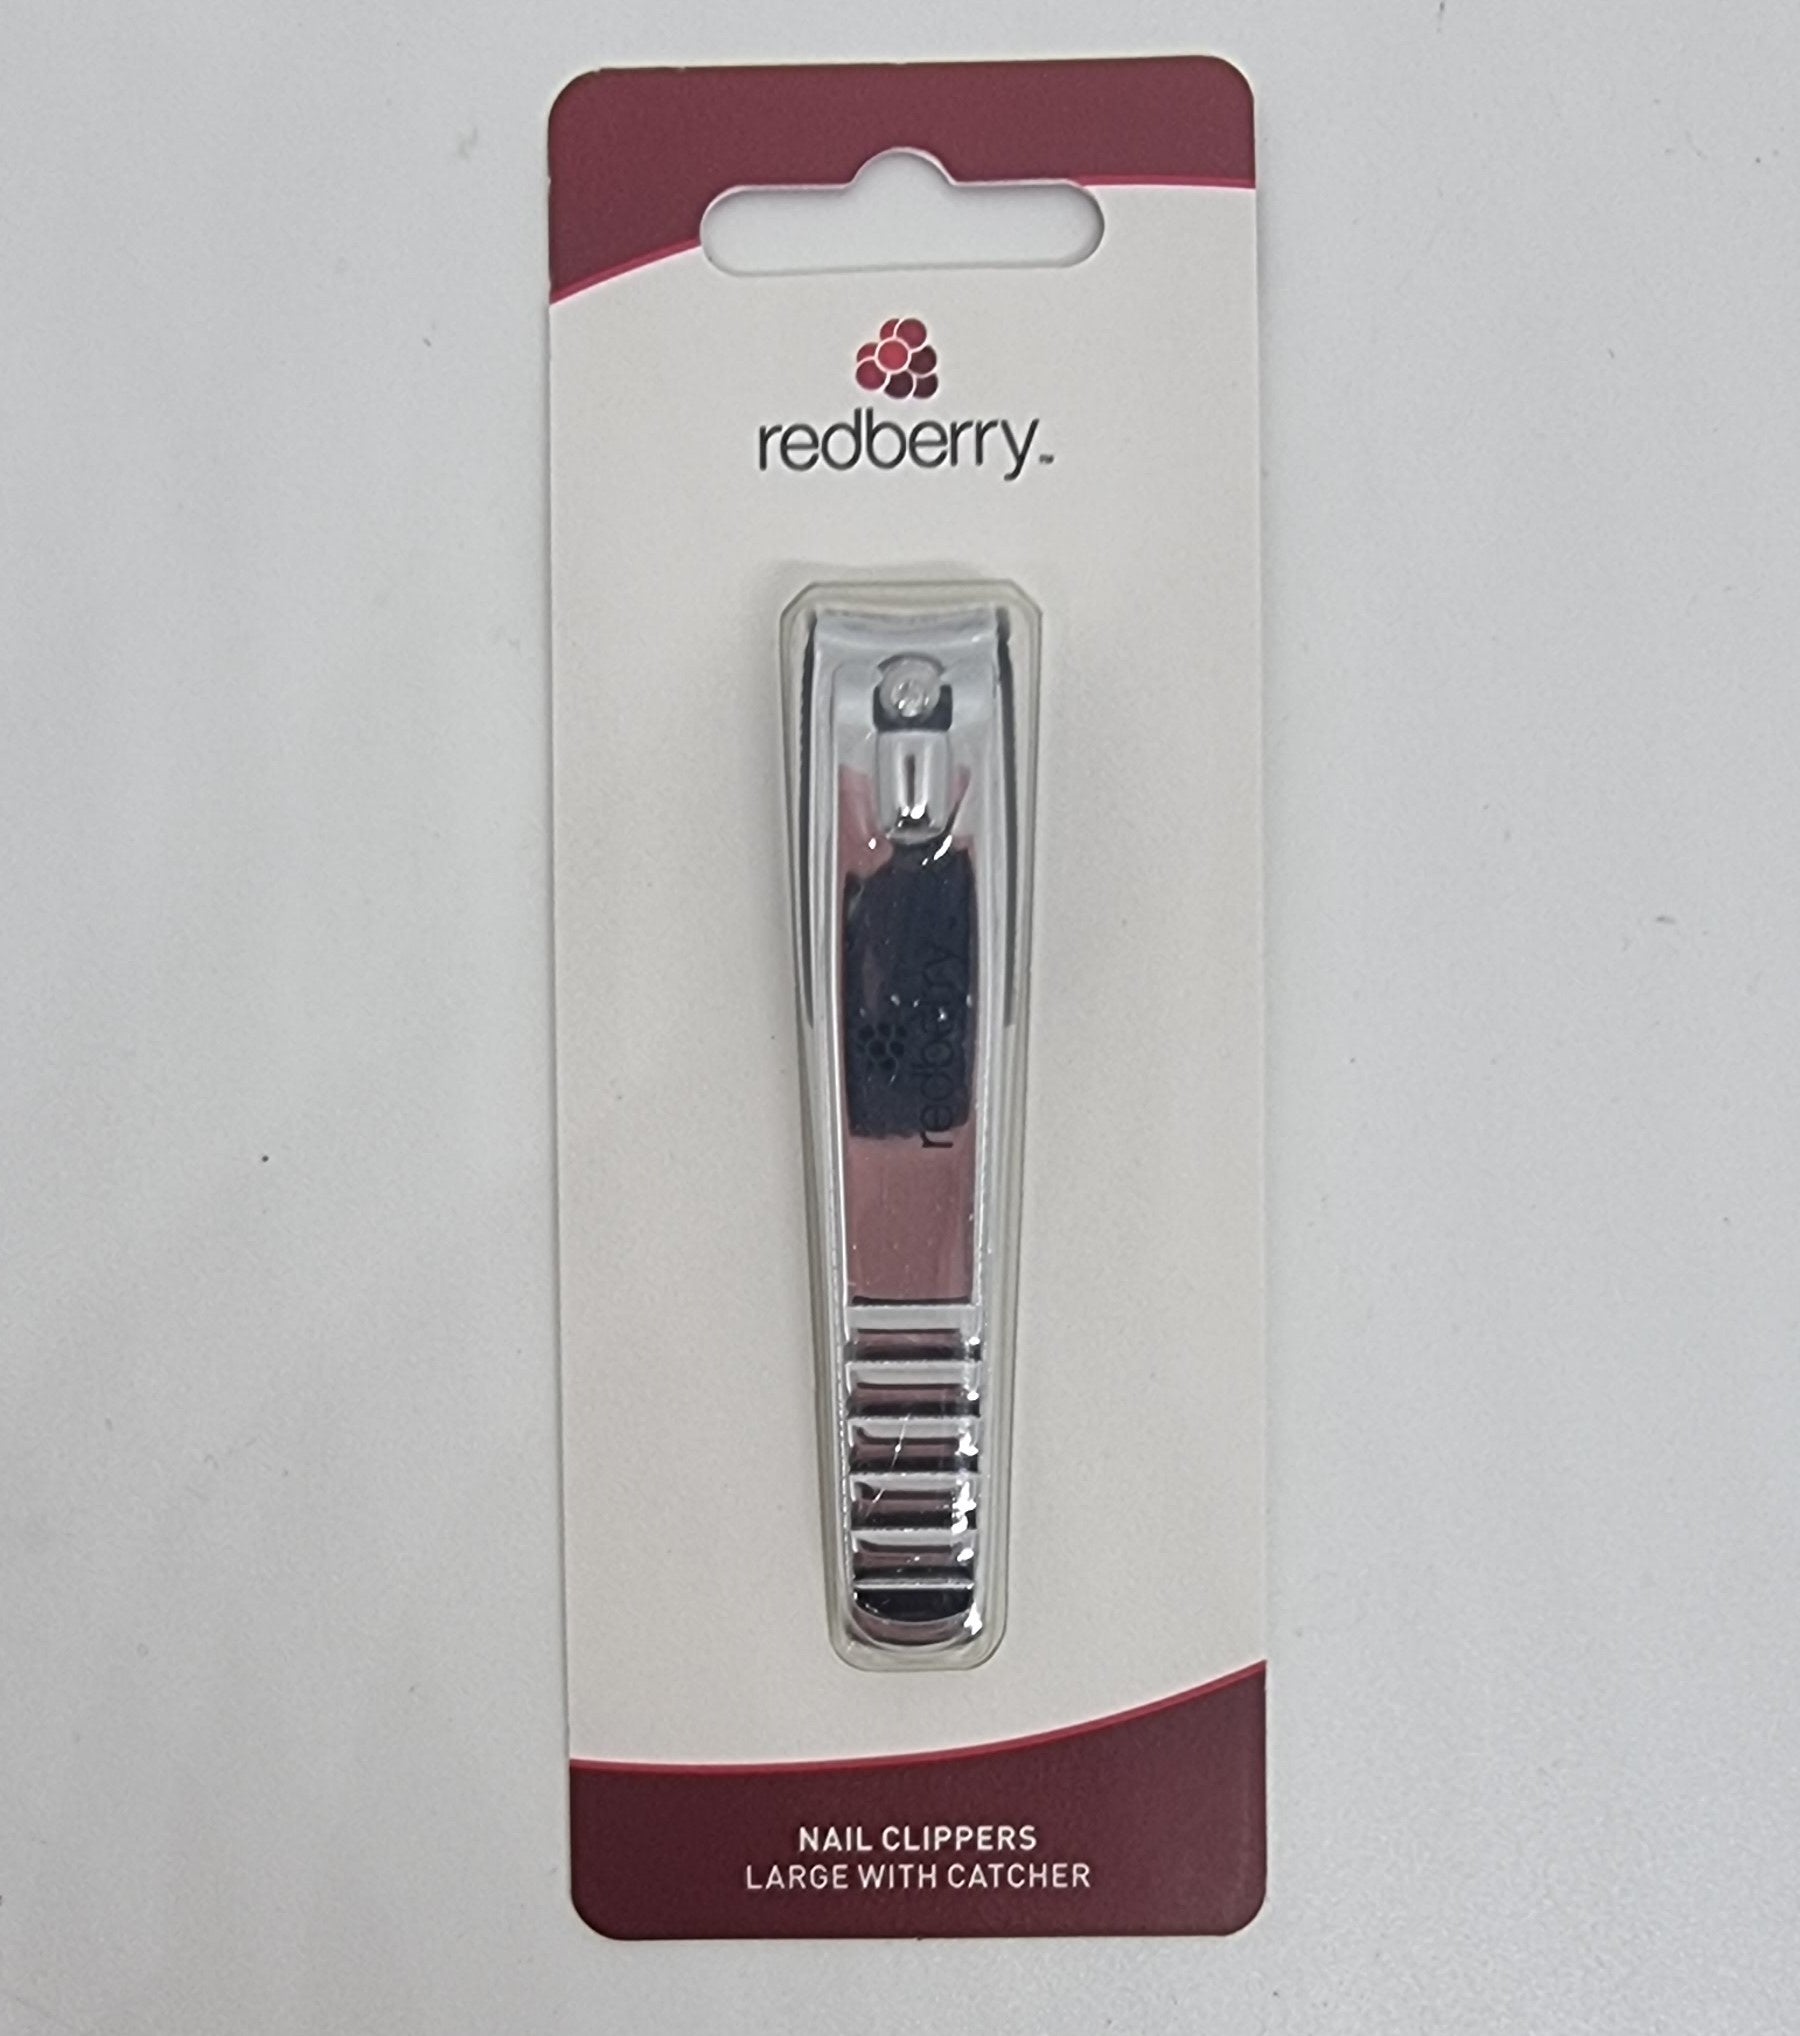 Redberry Nail Clippers Large with Catcher